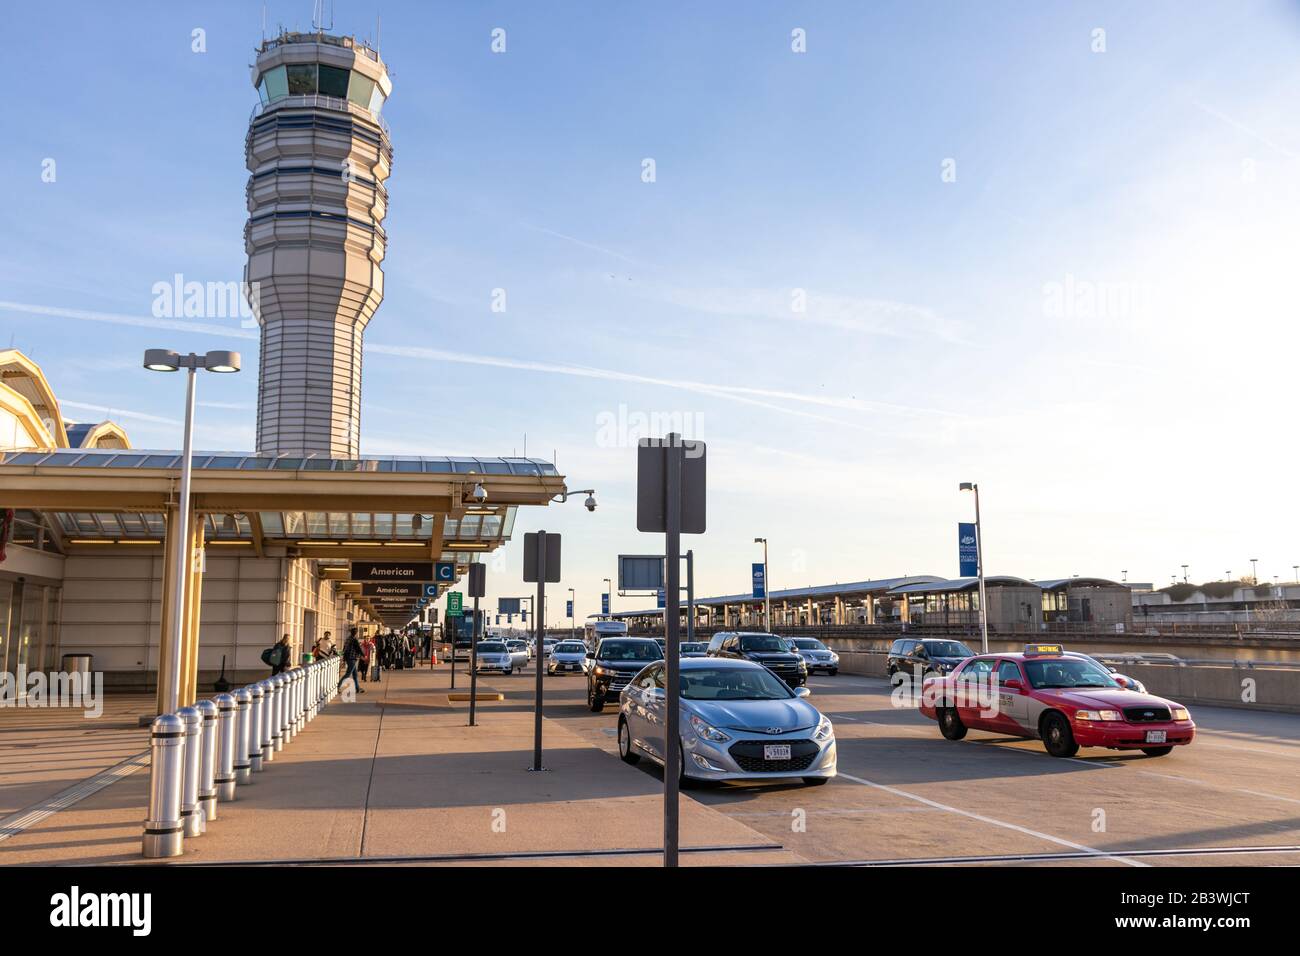 Ronald Reagan Washington National Airport Terminal B/C on busy, sunny afternoon with Air Traffic Control Tower seen in the background. Stock Photo